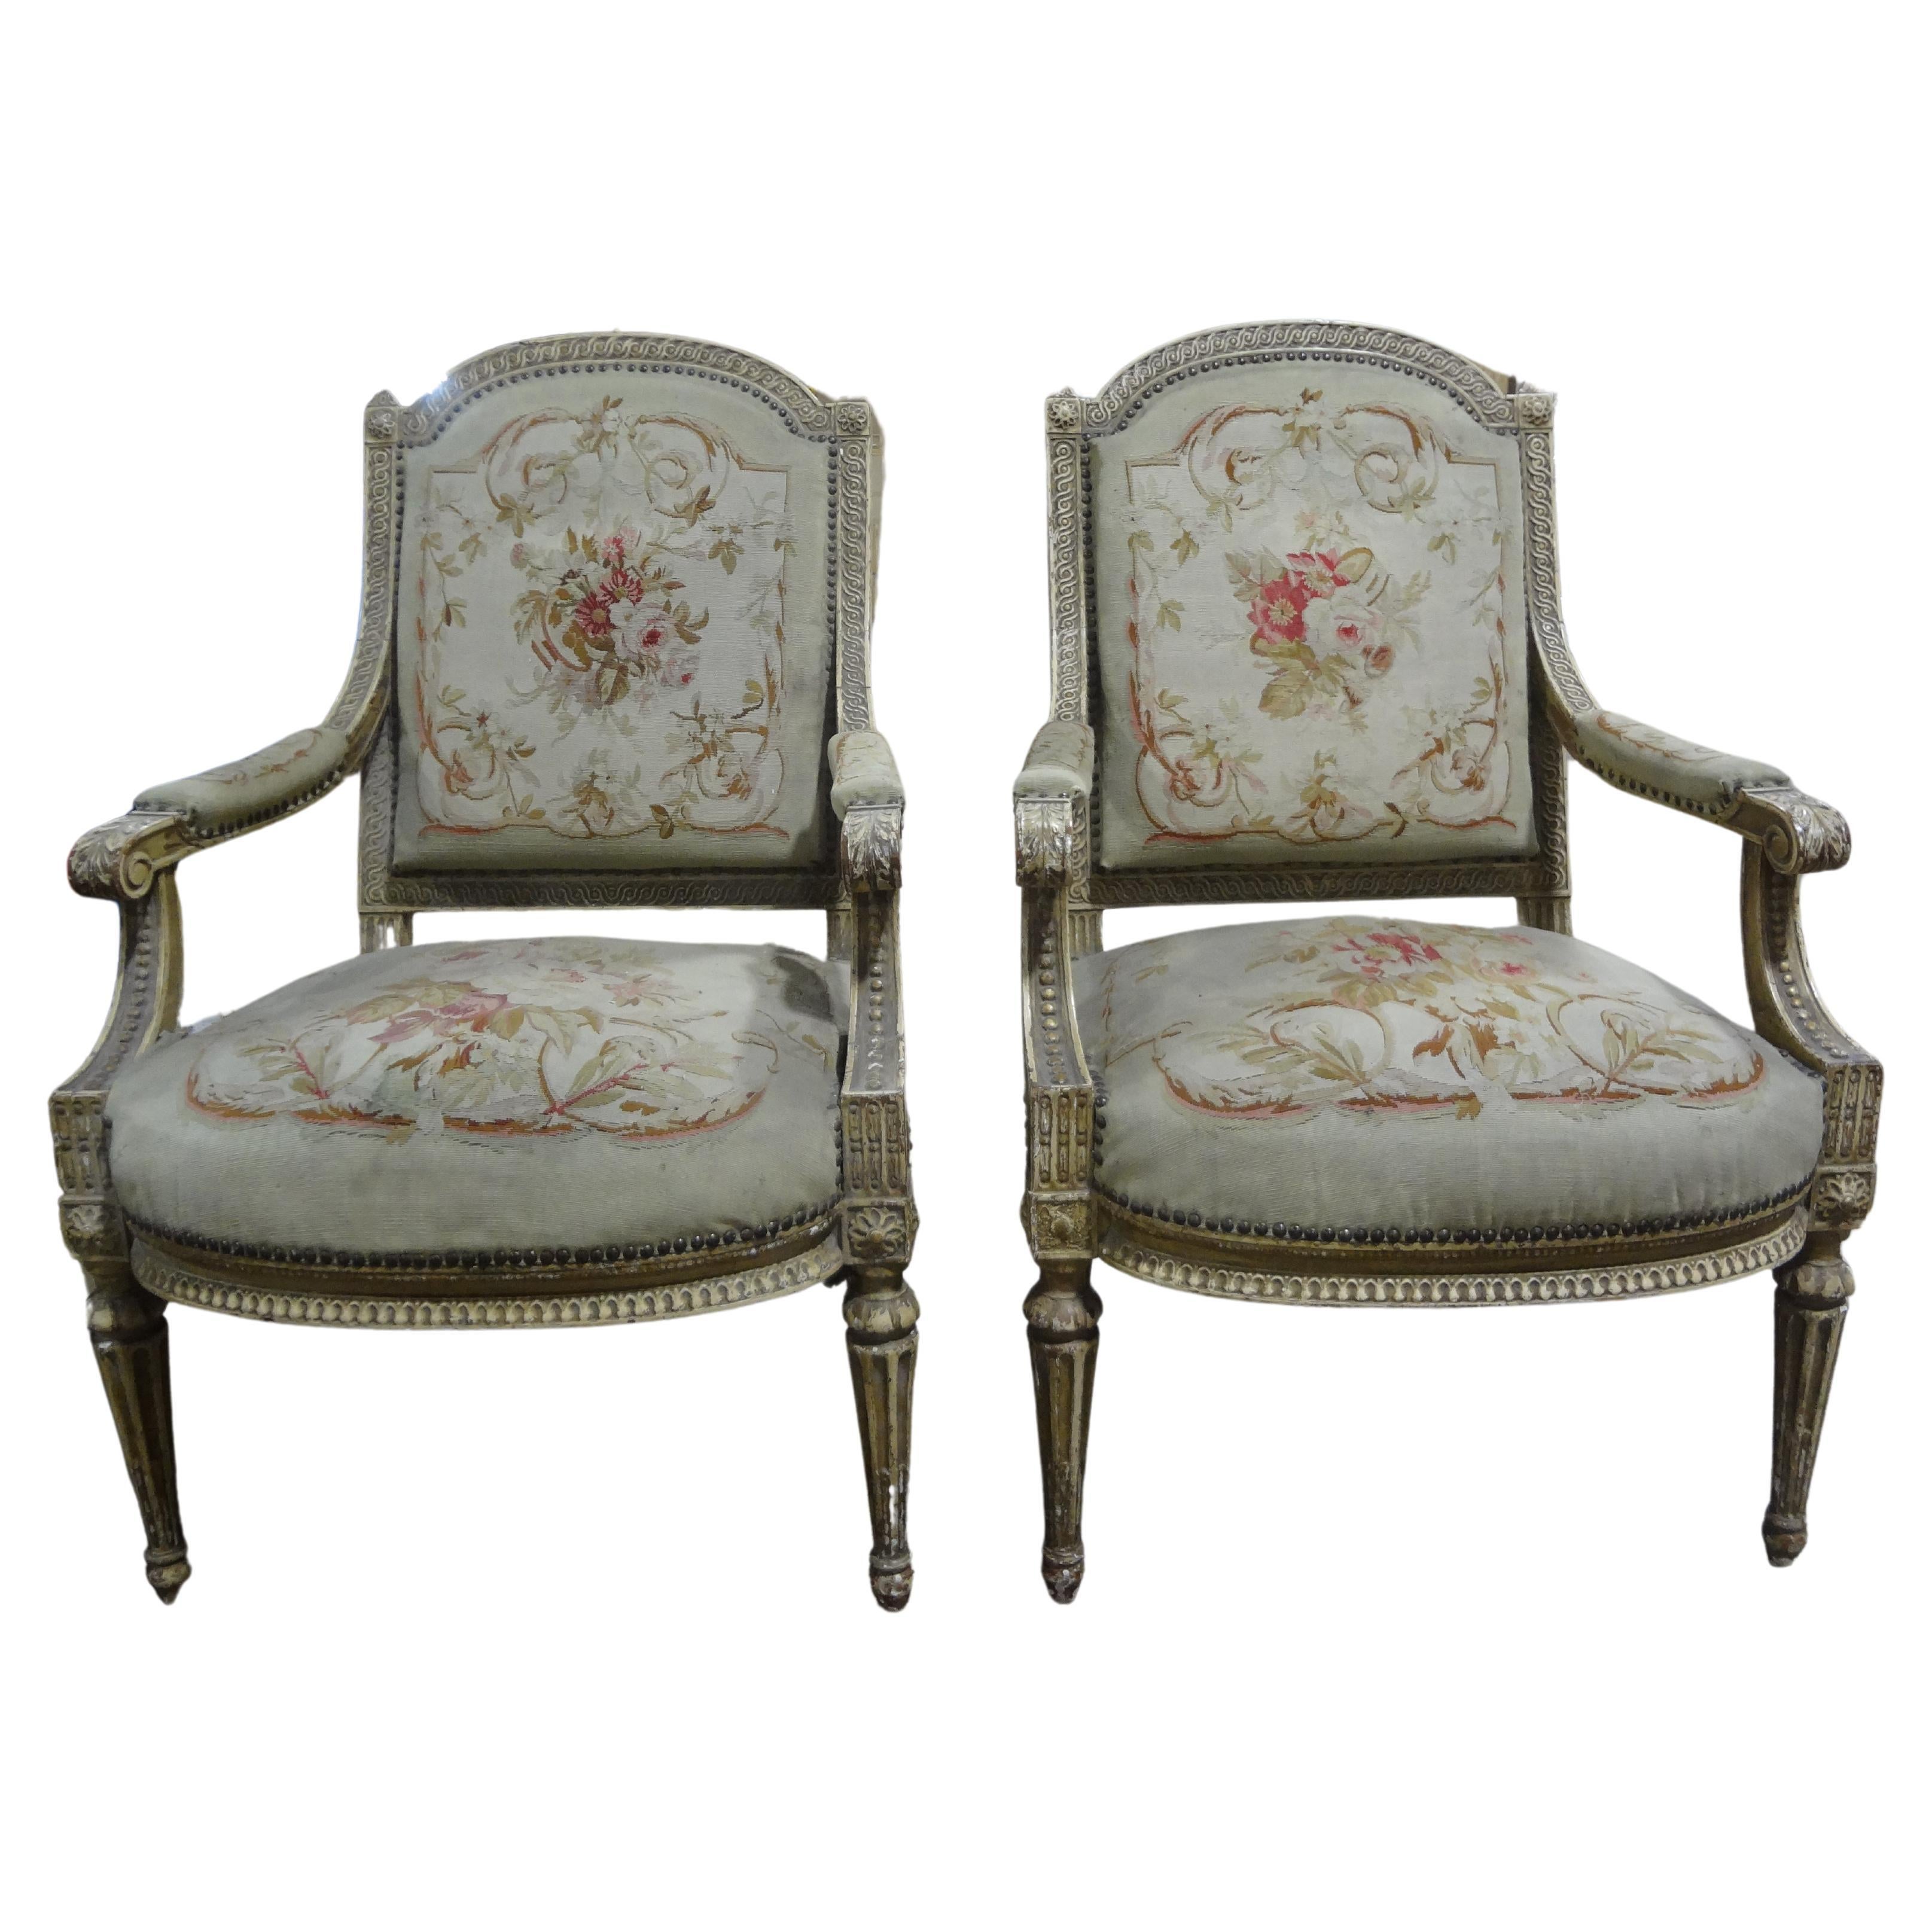 Pair Of 19th Century French Louis XVI Style Chairs